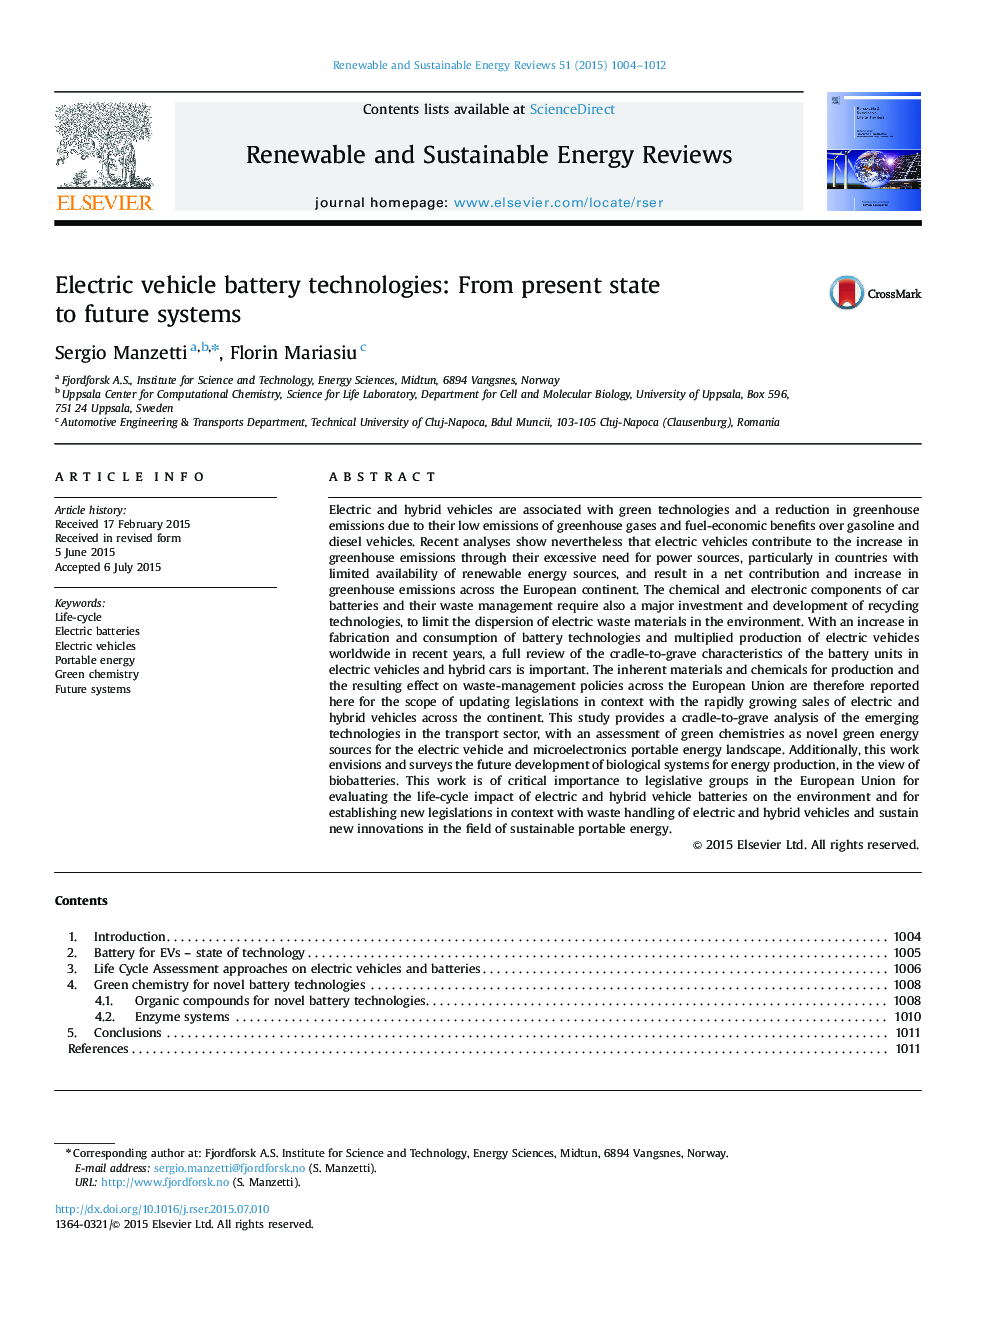 Electric vehicle battery technologies: From present state to future systems